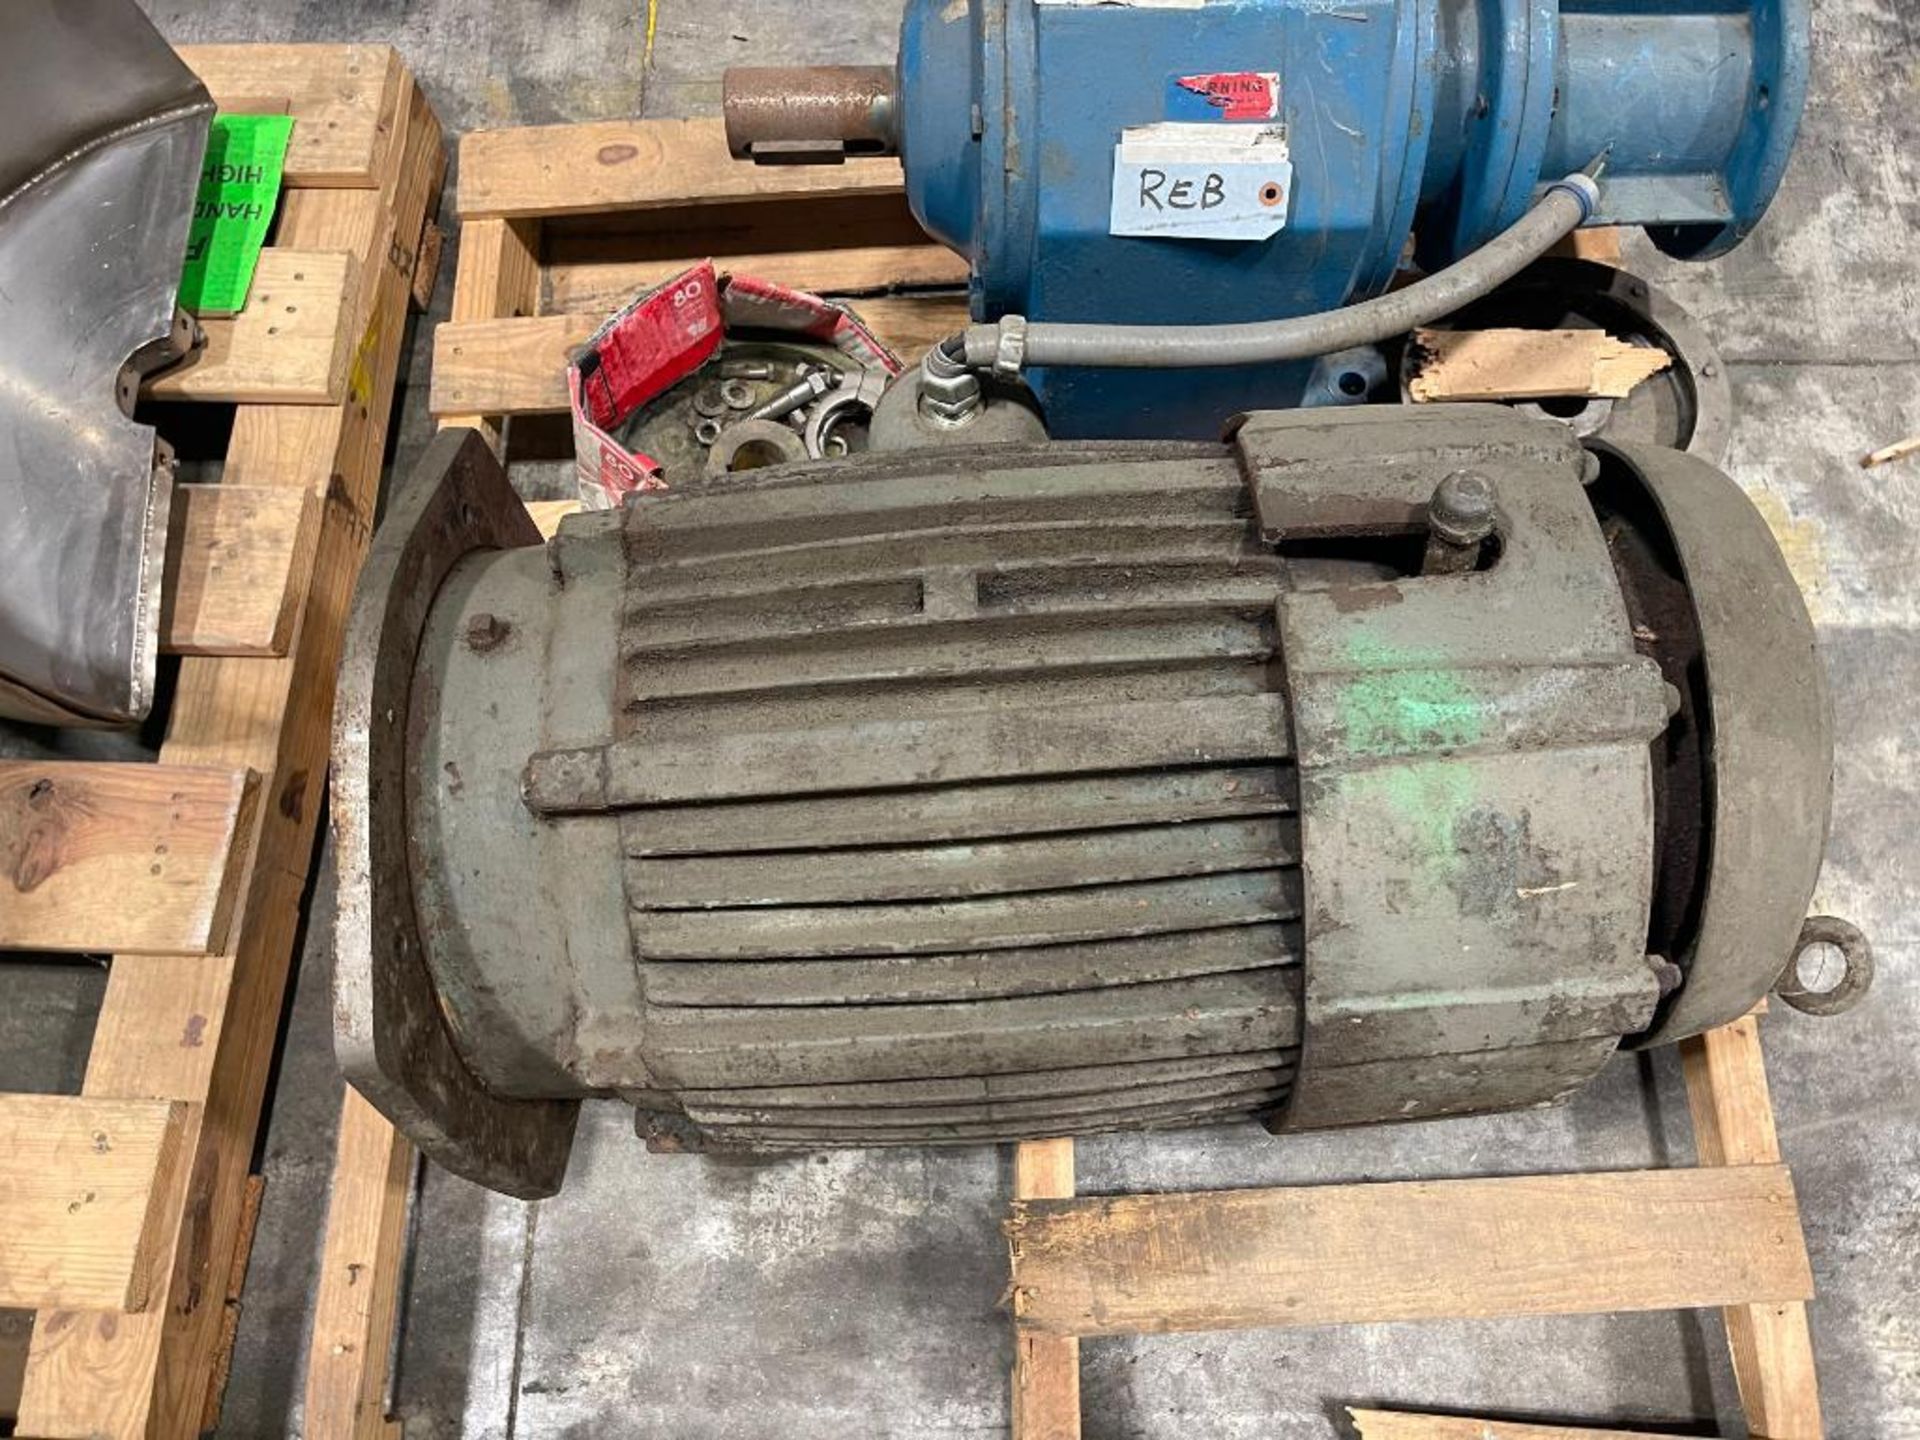 motor and drive on pallet